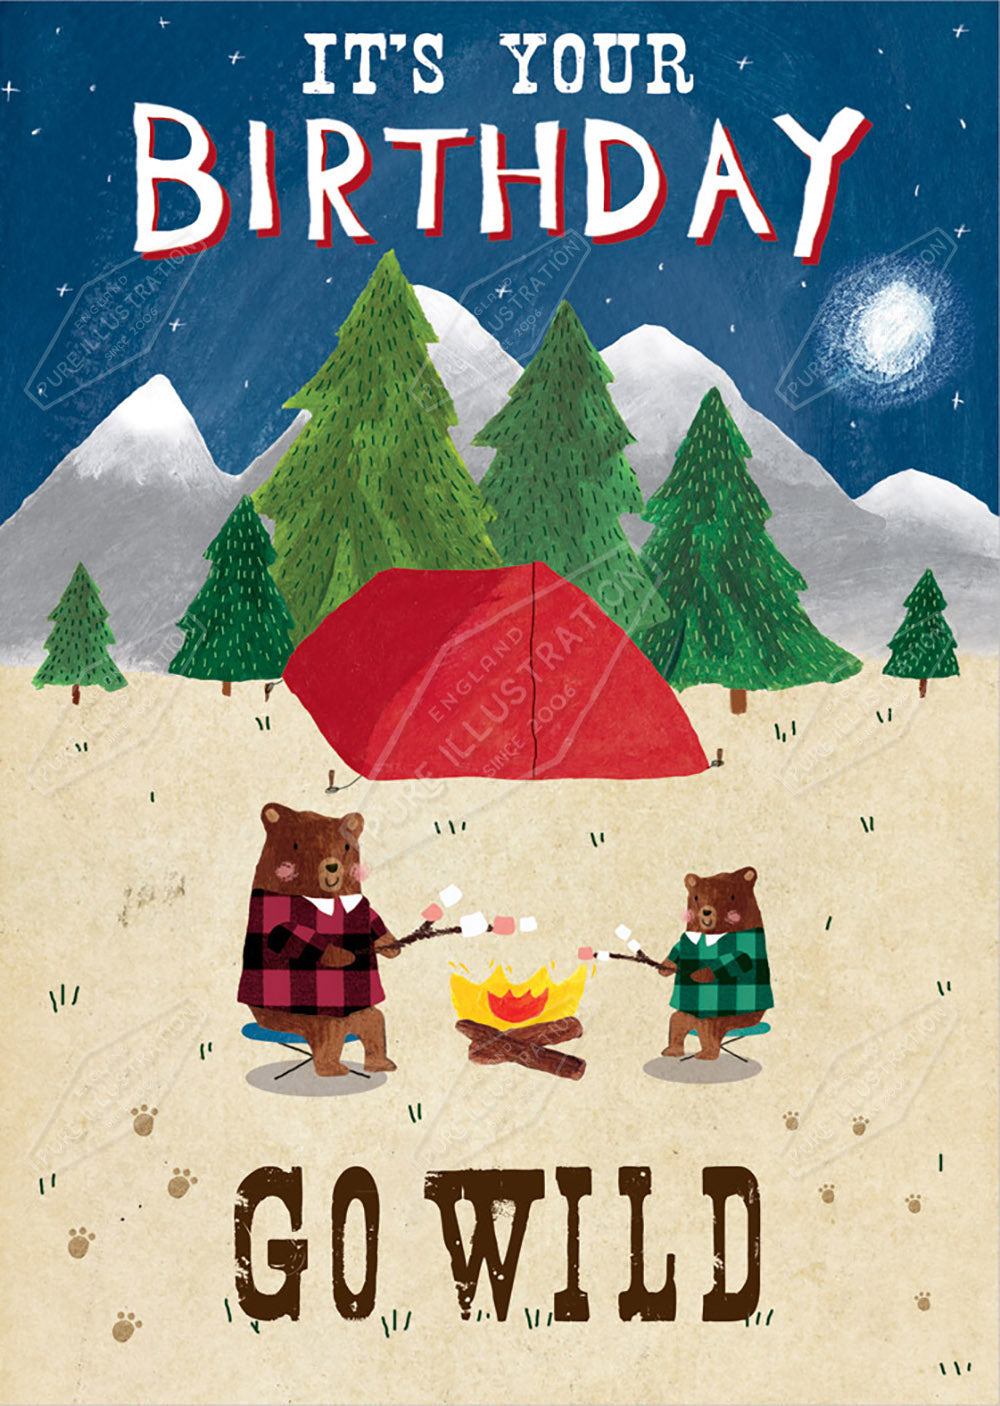 Birthday / Father's Day Greeting Card Design by Cory Reid for Pure Art Licensing Agency & Surface Design Studio